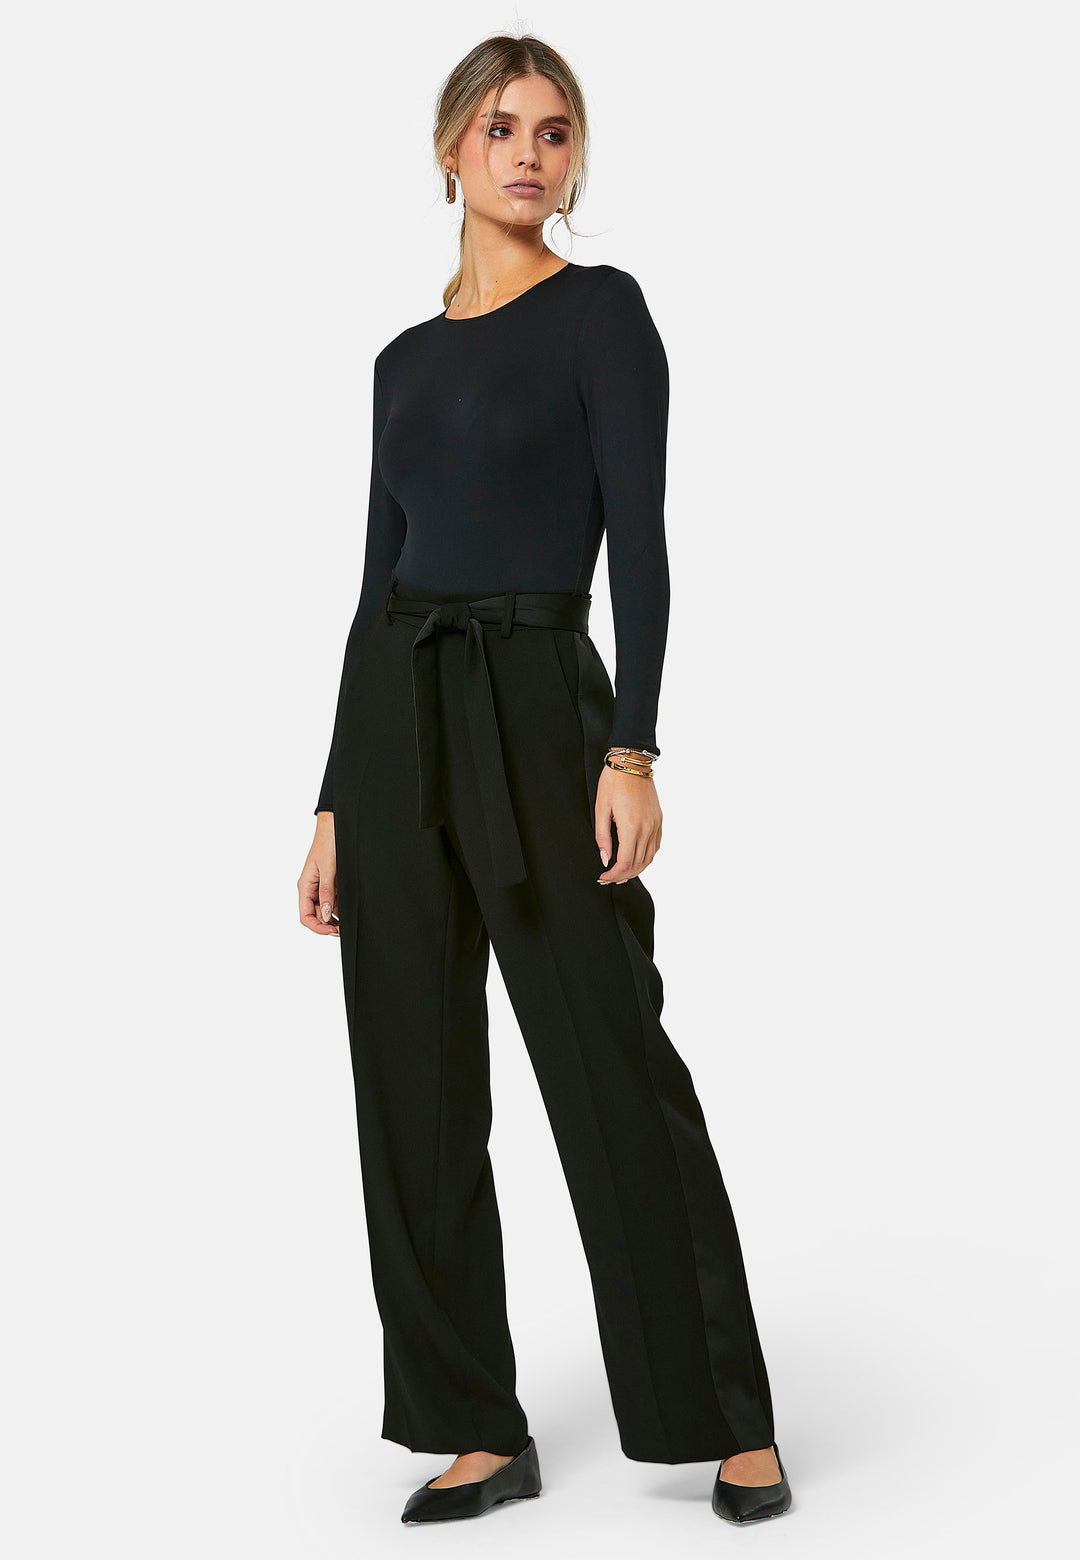 Delilah, Black flat front straight leg trouser with side seam pockets in fluid satin back crepe. Feature a detachable self-fabric belt and a satin stripe along the side seam of the leg. Coordinate with black sparkly tops or matching Lal top for a relaxed take on 'after six' dressing.